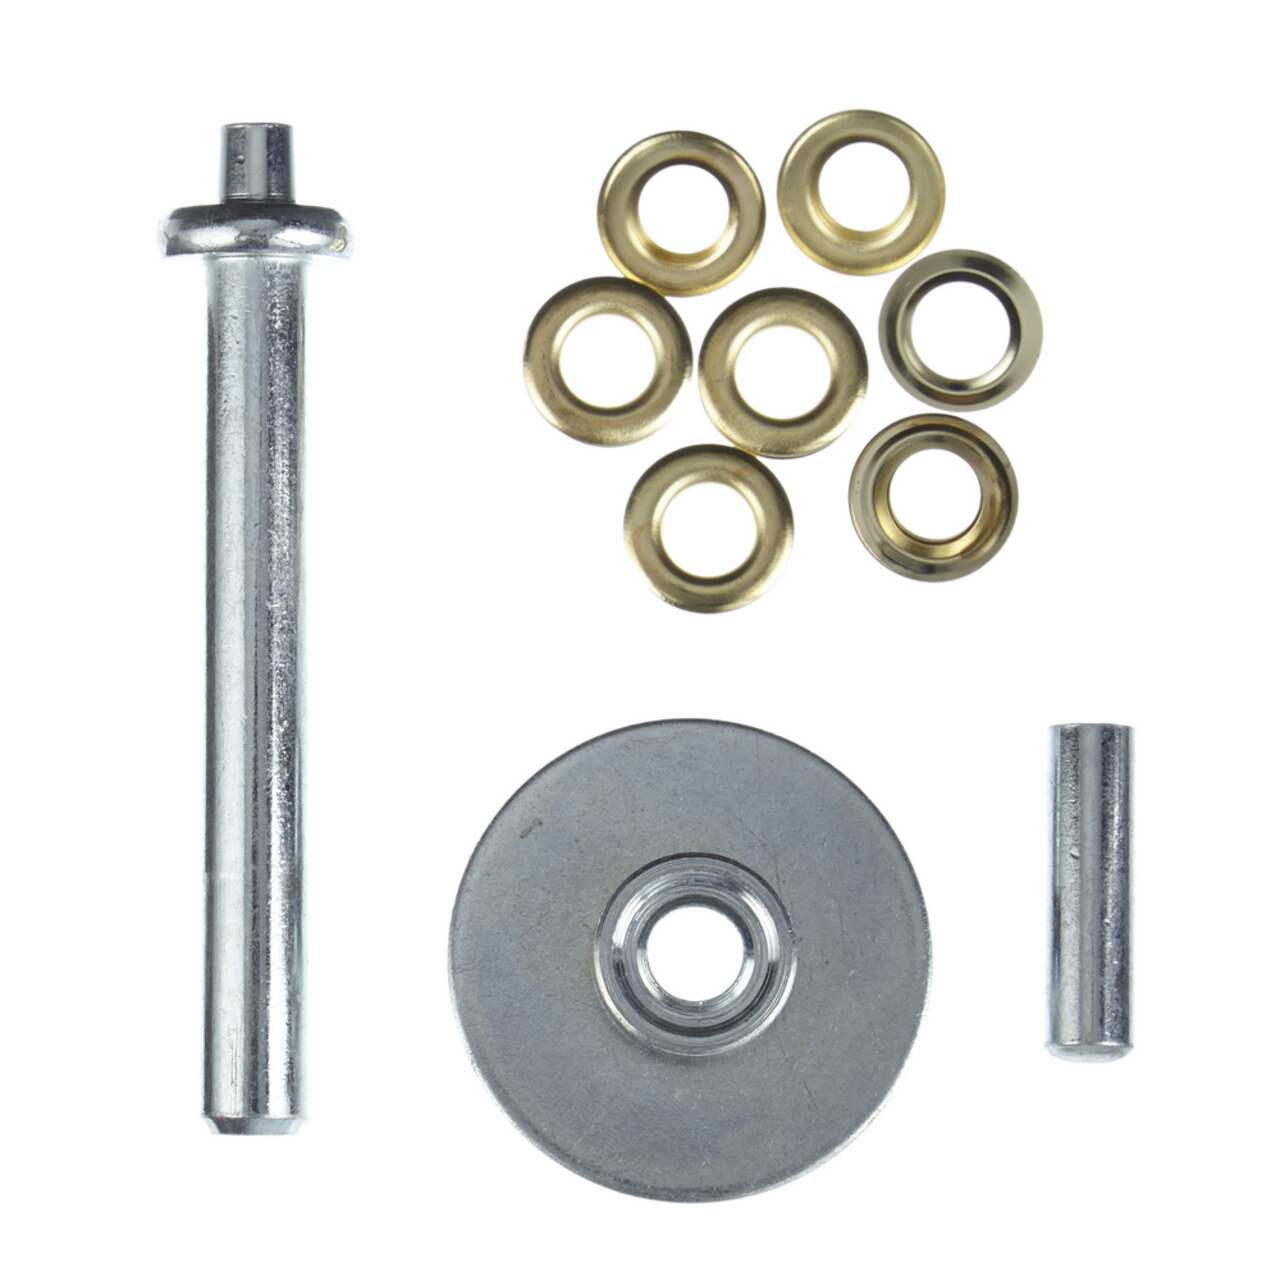 Outbound Metal Grommet Repair & Replacement Kit w/ Tools For Fabric & Tarps